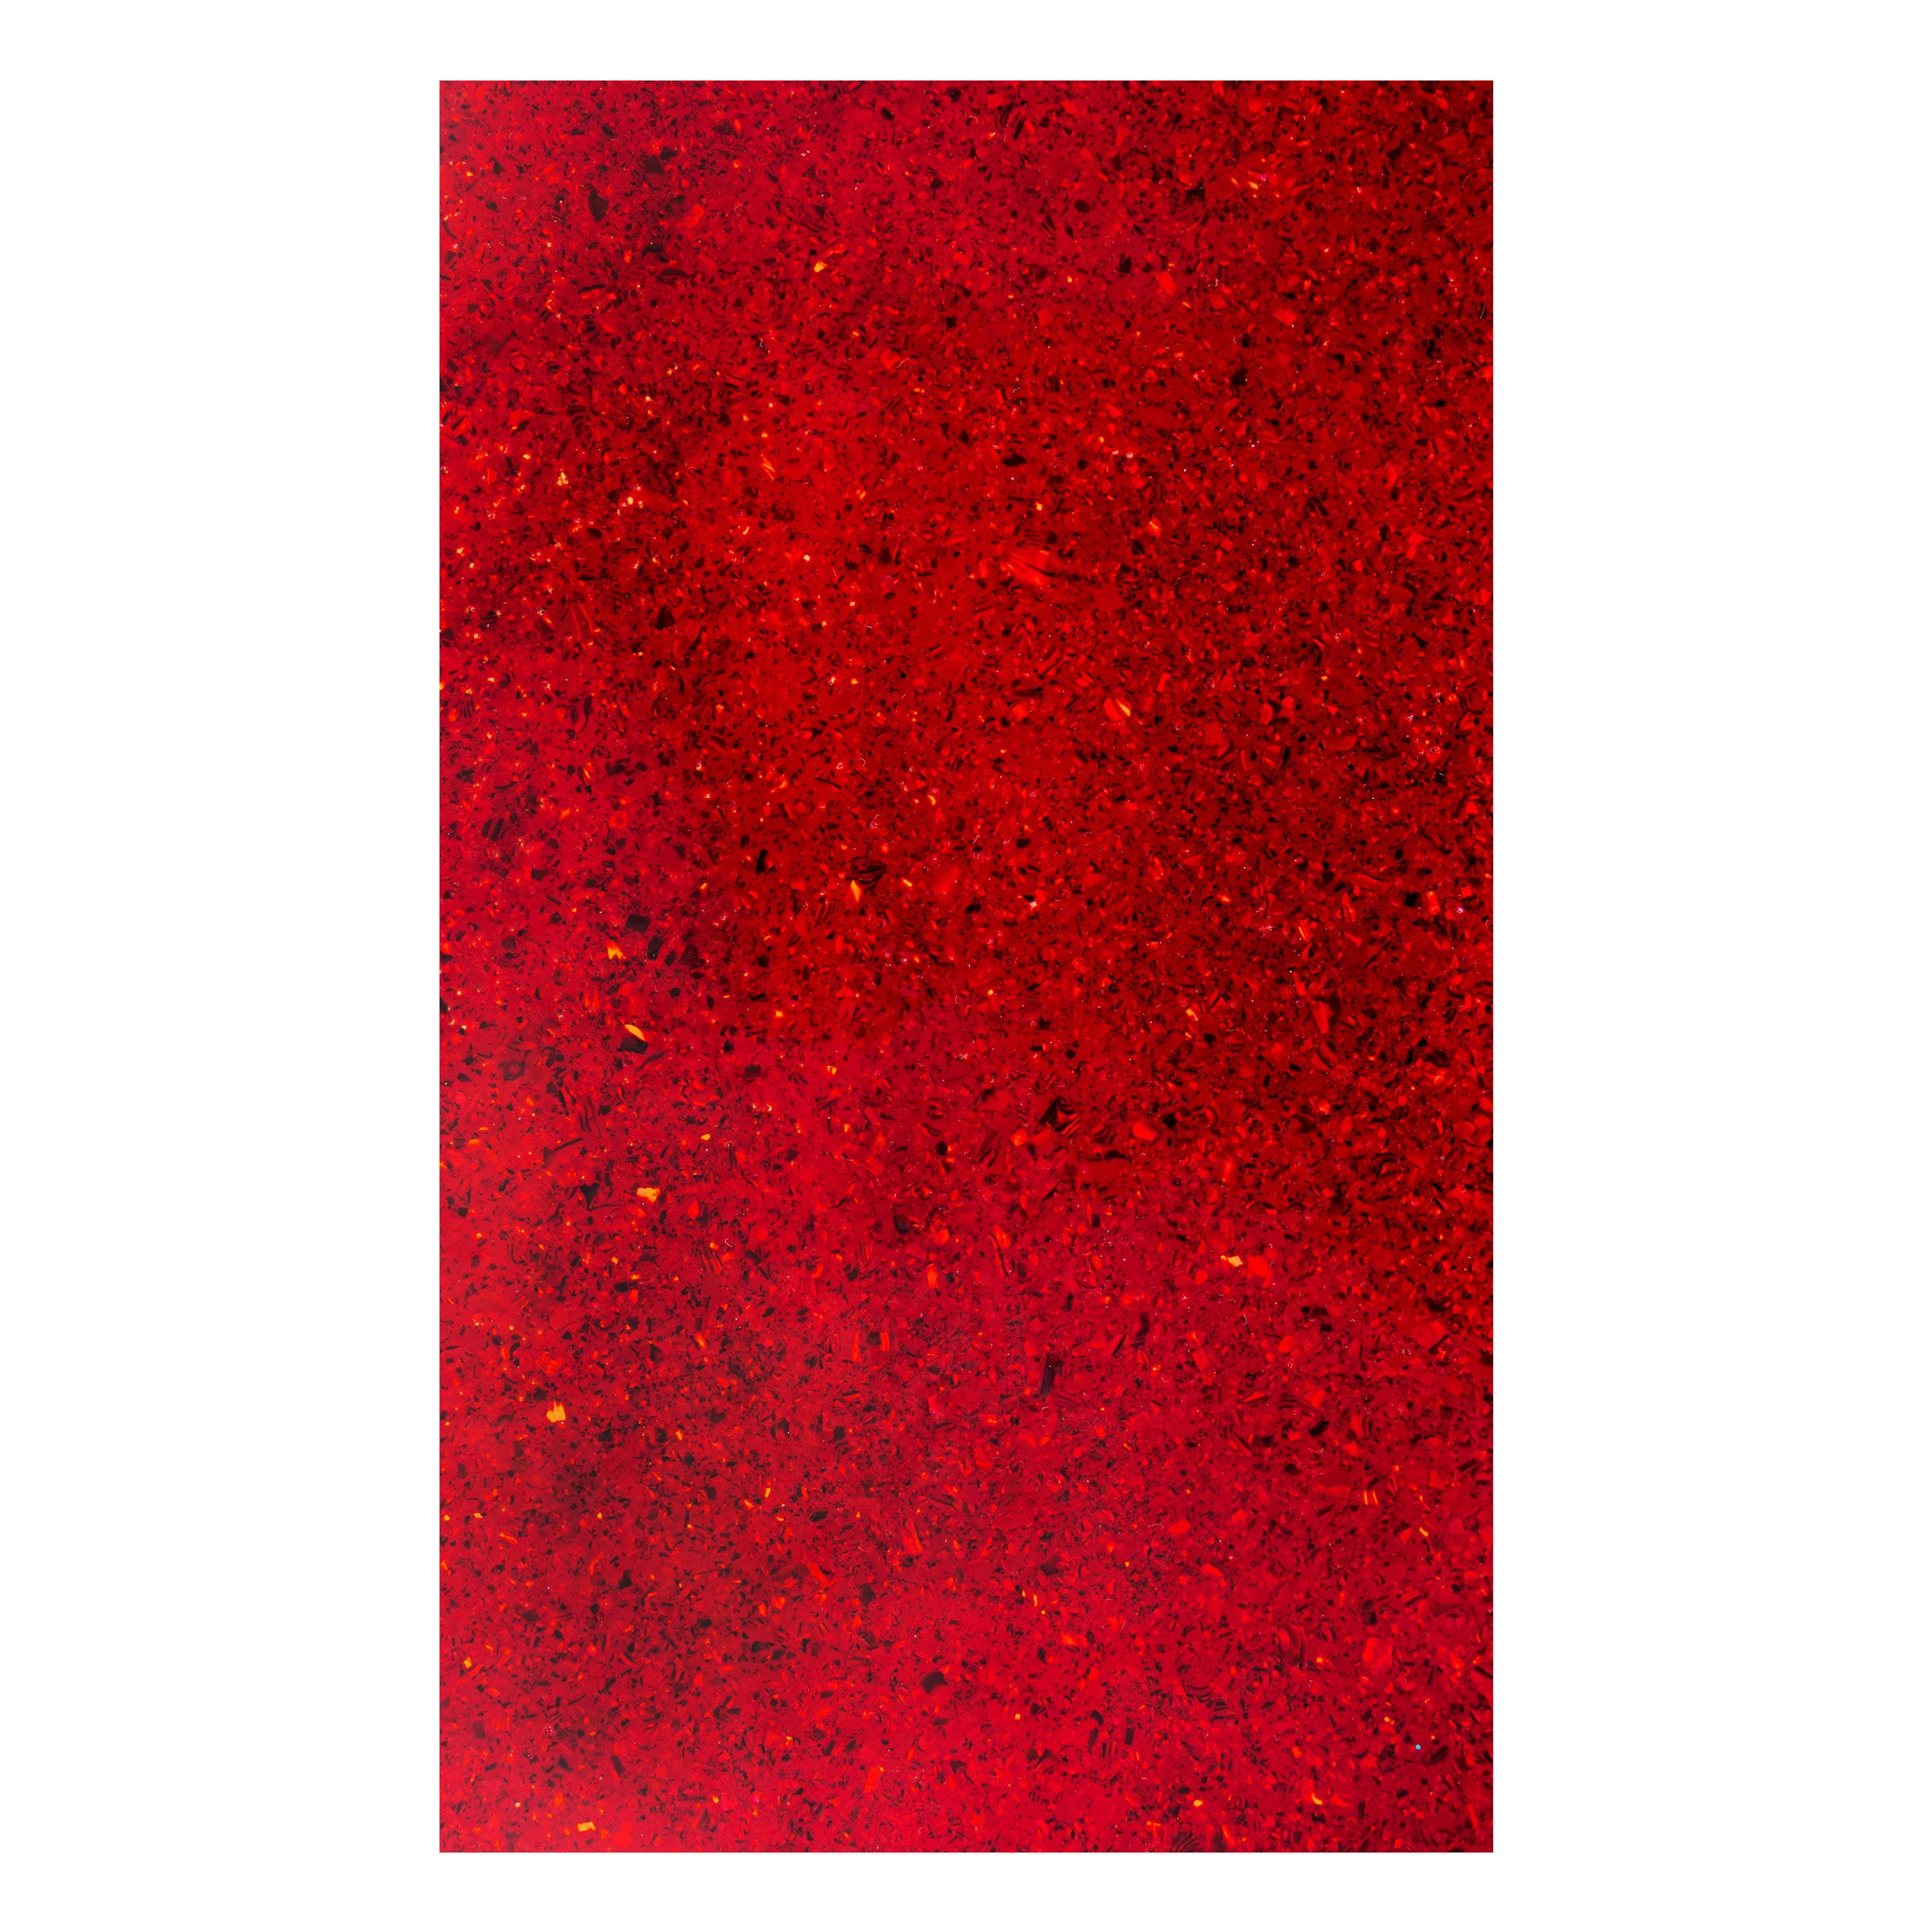 #color_star flake red pearl